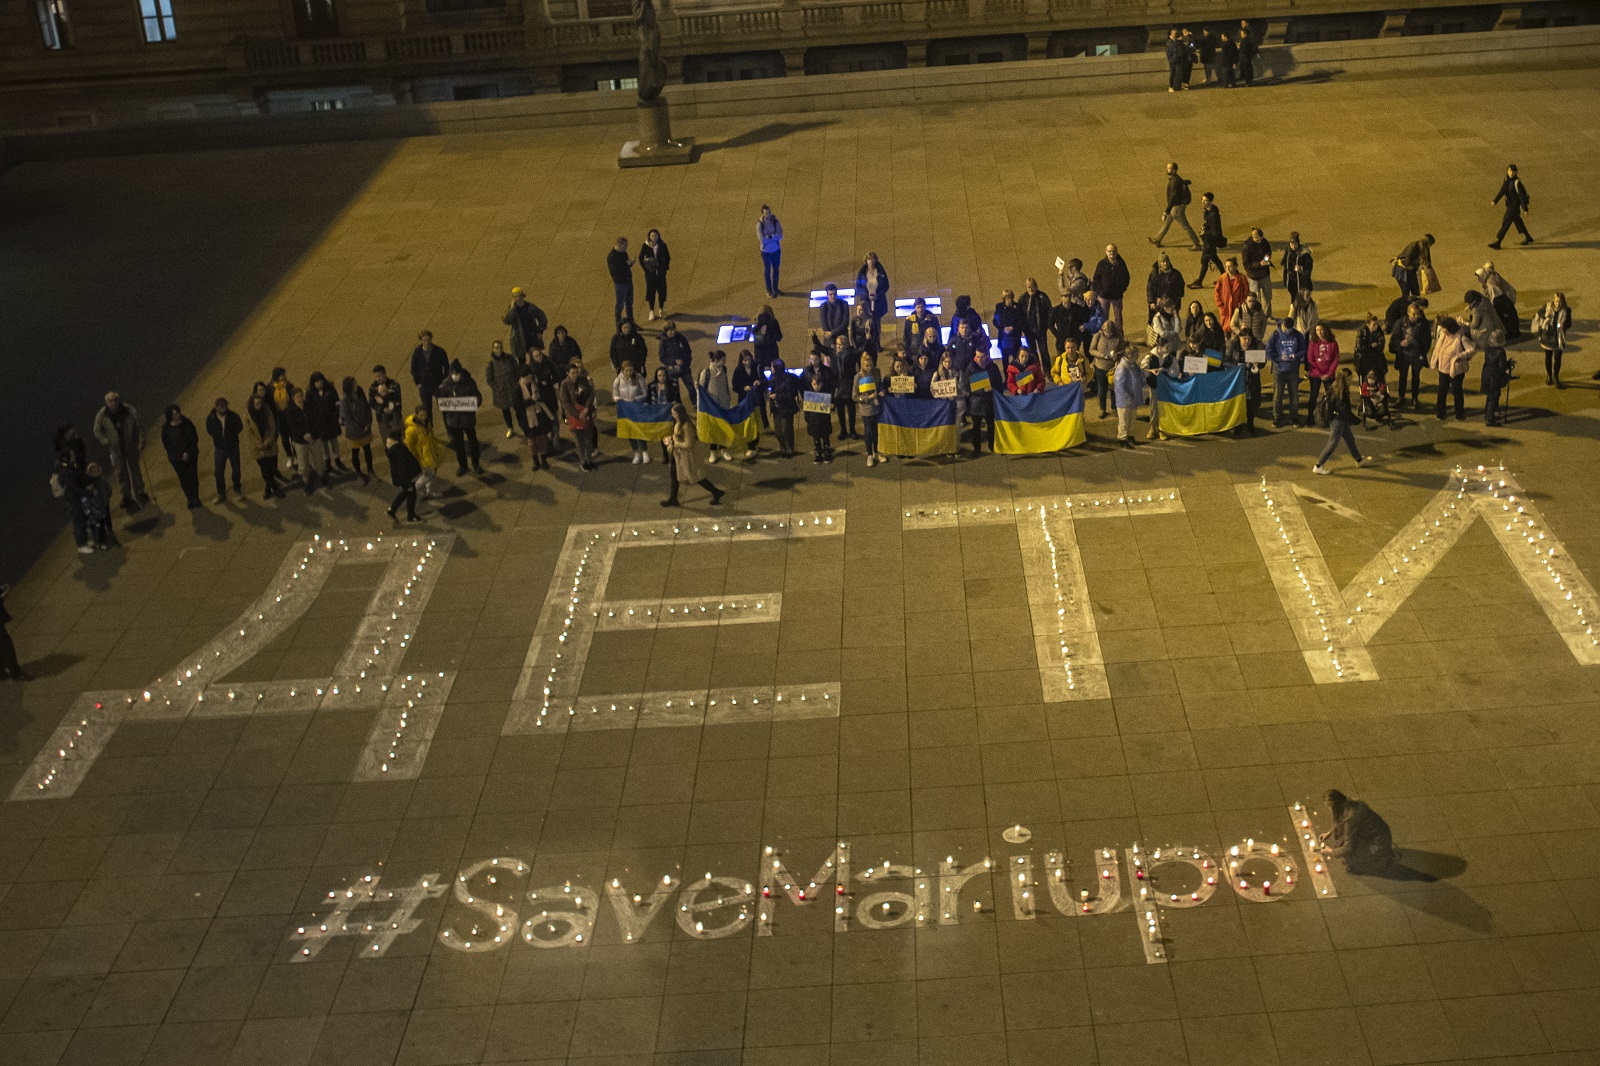 epa09843117 People light candles during the Light for Mariupol peace rally for people who died during a shelling in the eastern Ukrainian city of Mariupol, in front of the National Theatre building in Prague, Czech Republic, 22 March 2022. People created a large luminous sign ‘ДЕТИ’, which means 'children' in Russian, the same sign that was meant to protect the theatre in Mariupol against a bomb attack. At least 30 people were killed and about 100 others injured during this large-scale attack.  EPA/MARTIN DIVISEK